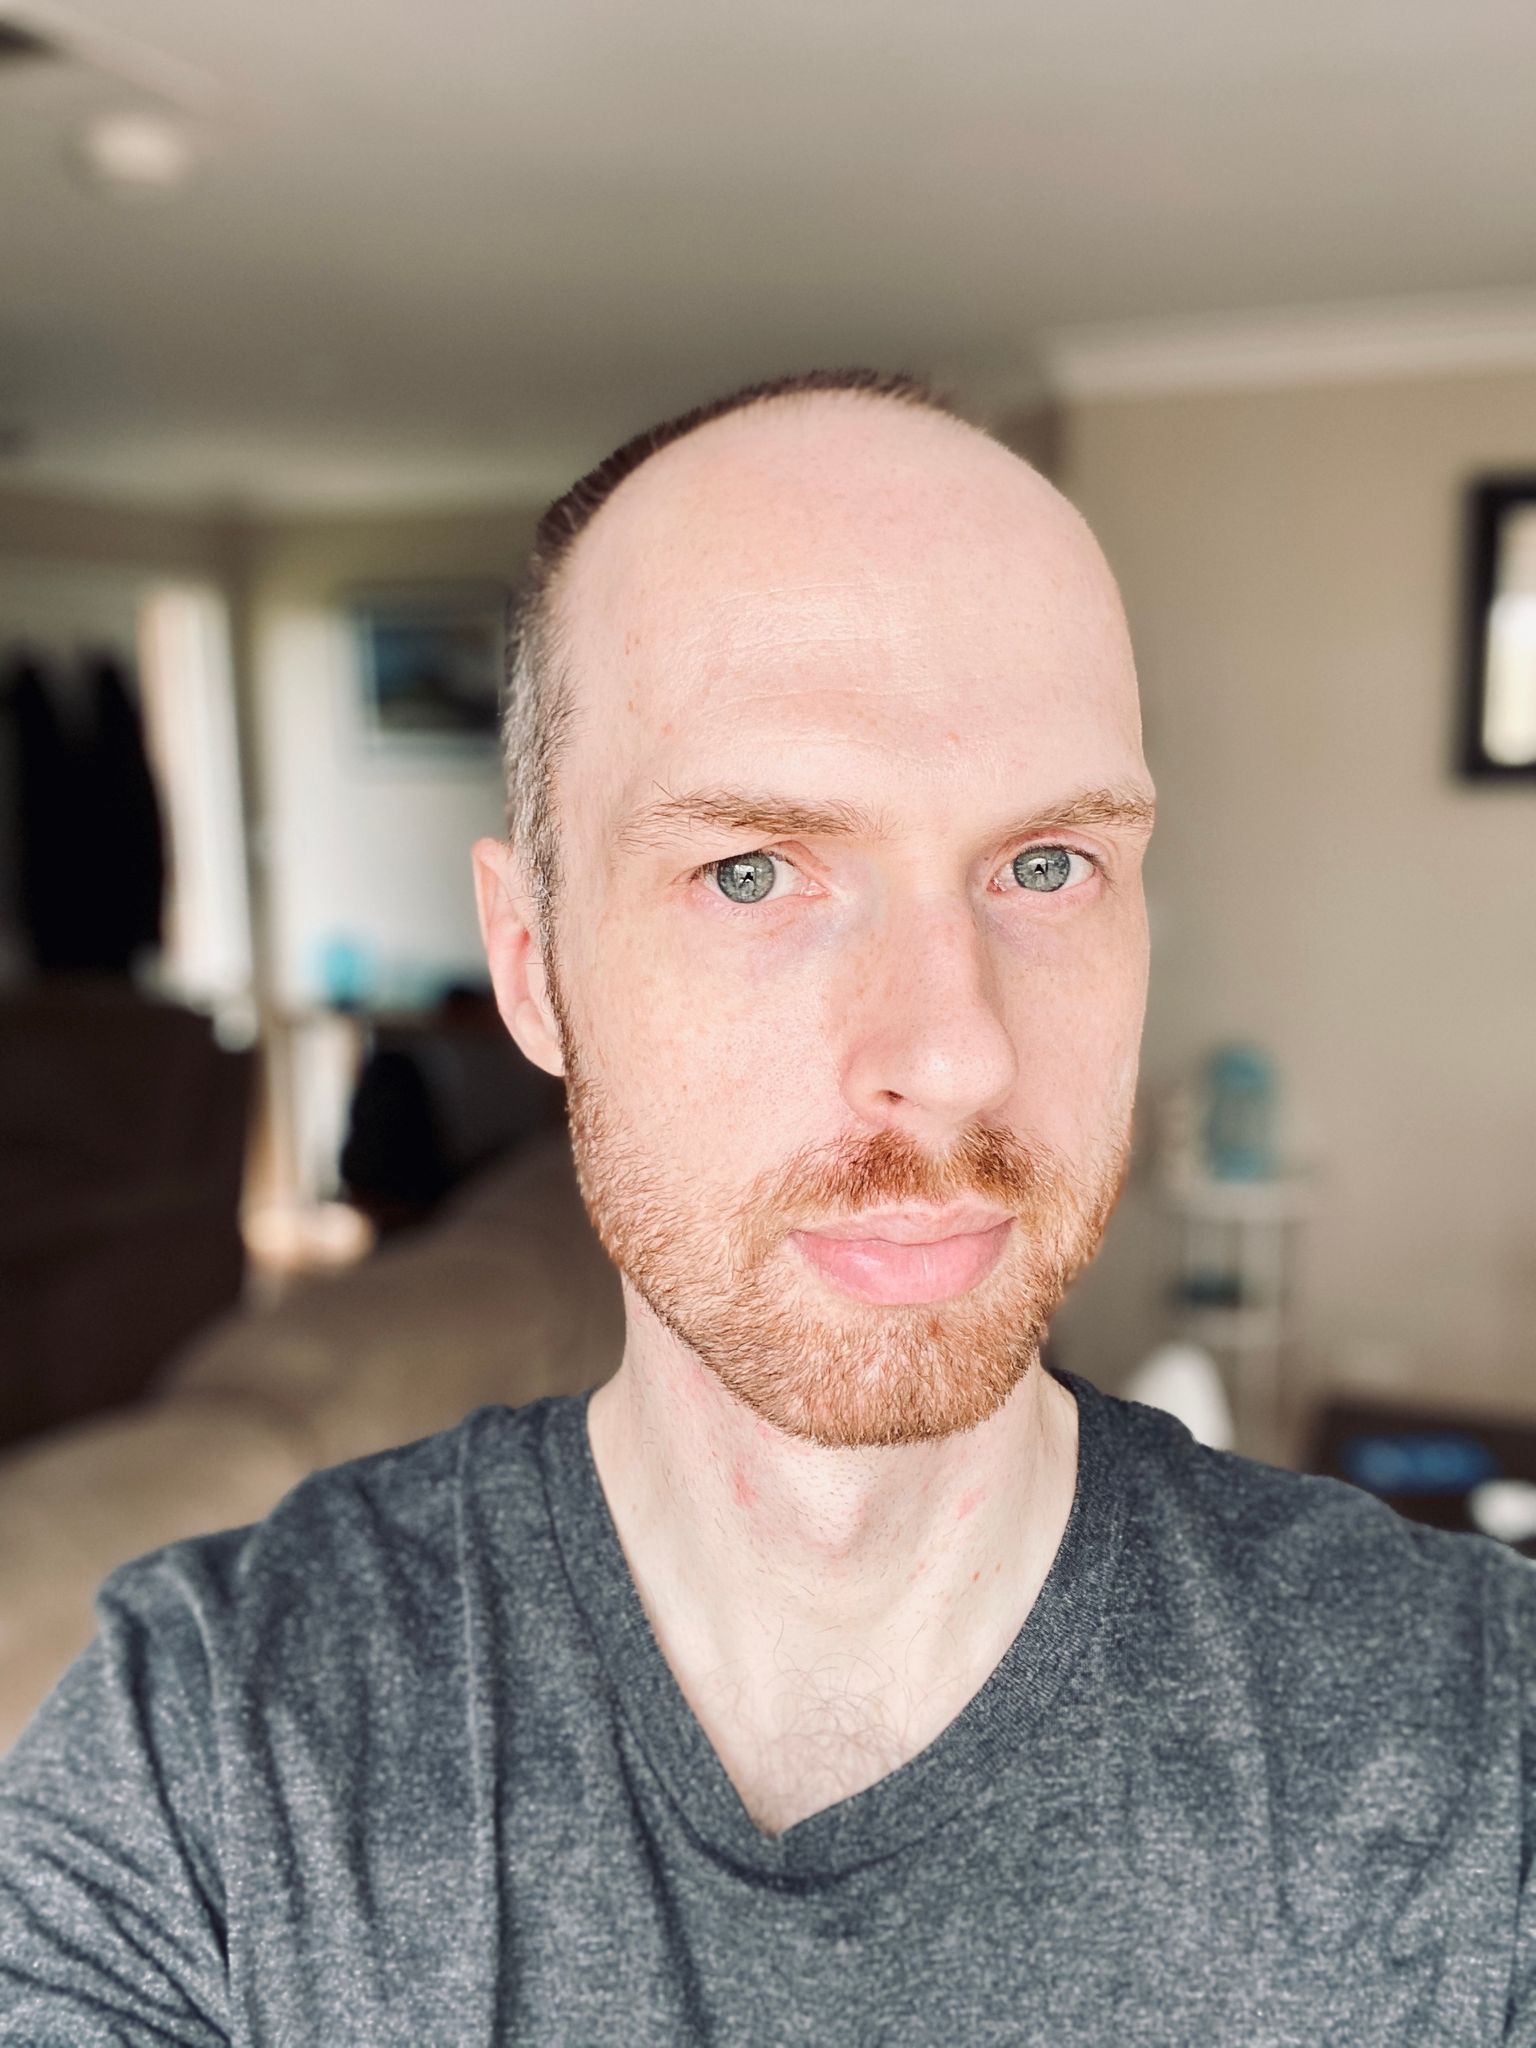 A photo of me, a white man with a short and neat and tidy red beard and a closely shaved head.